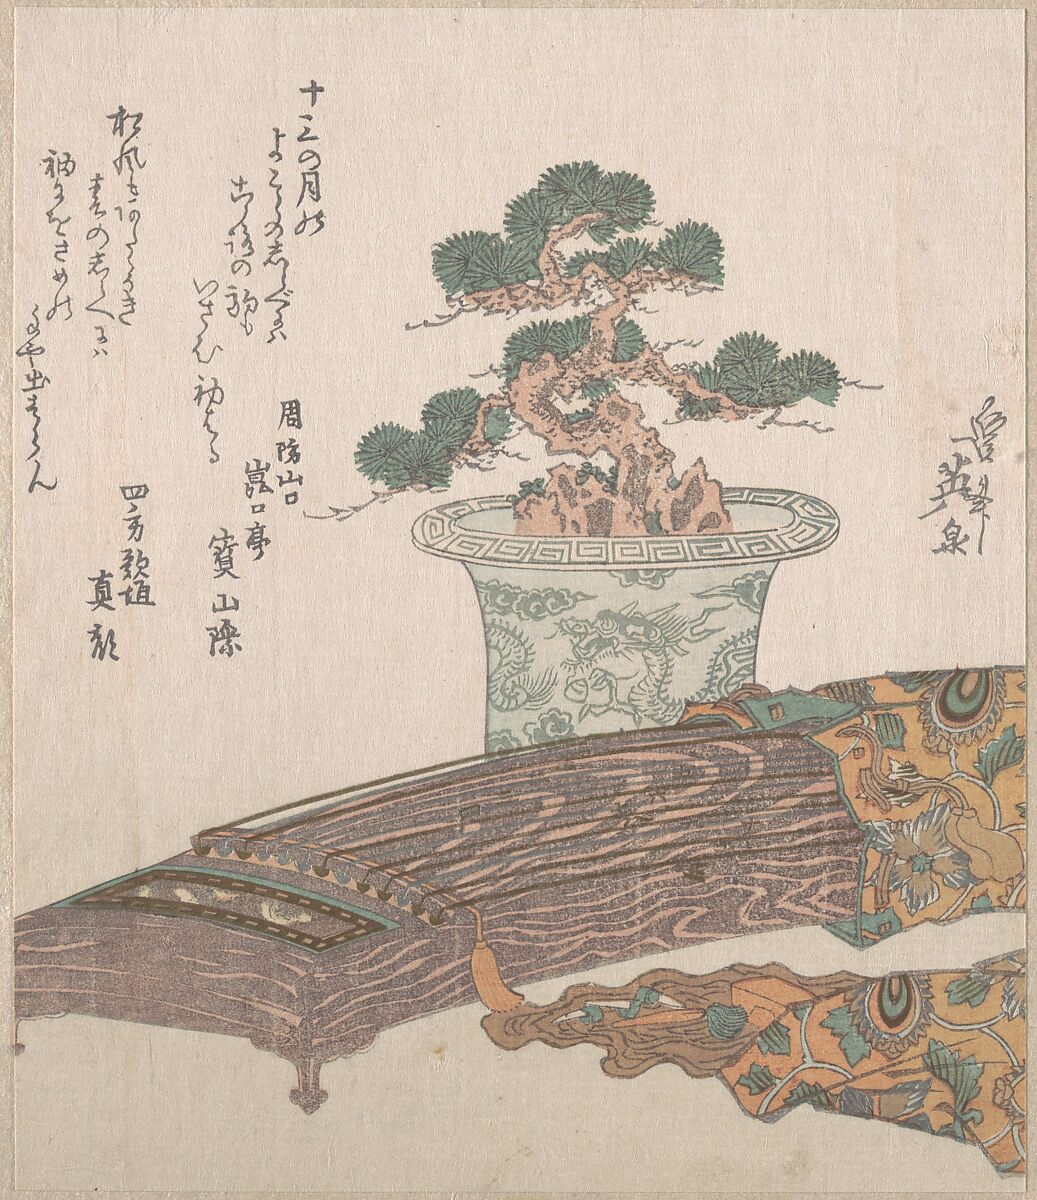 Potted Pine Tree and Koto (Japanese Harp), Keisai Eisen (Japanese, 1790–1848), Part of an album of woodblock prints (surimono); ink and color on paper, Japan 